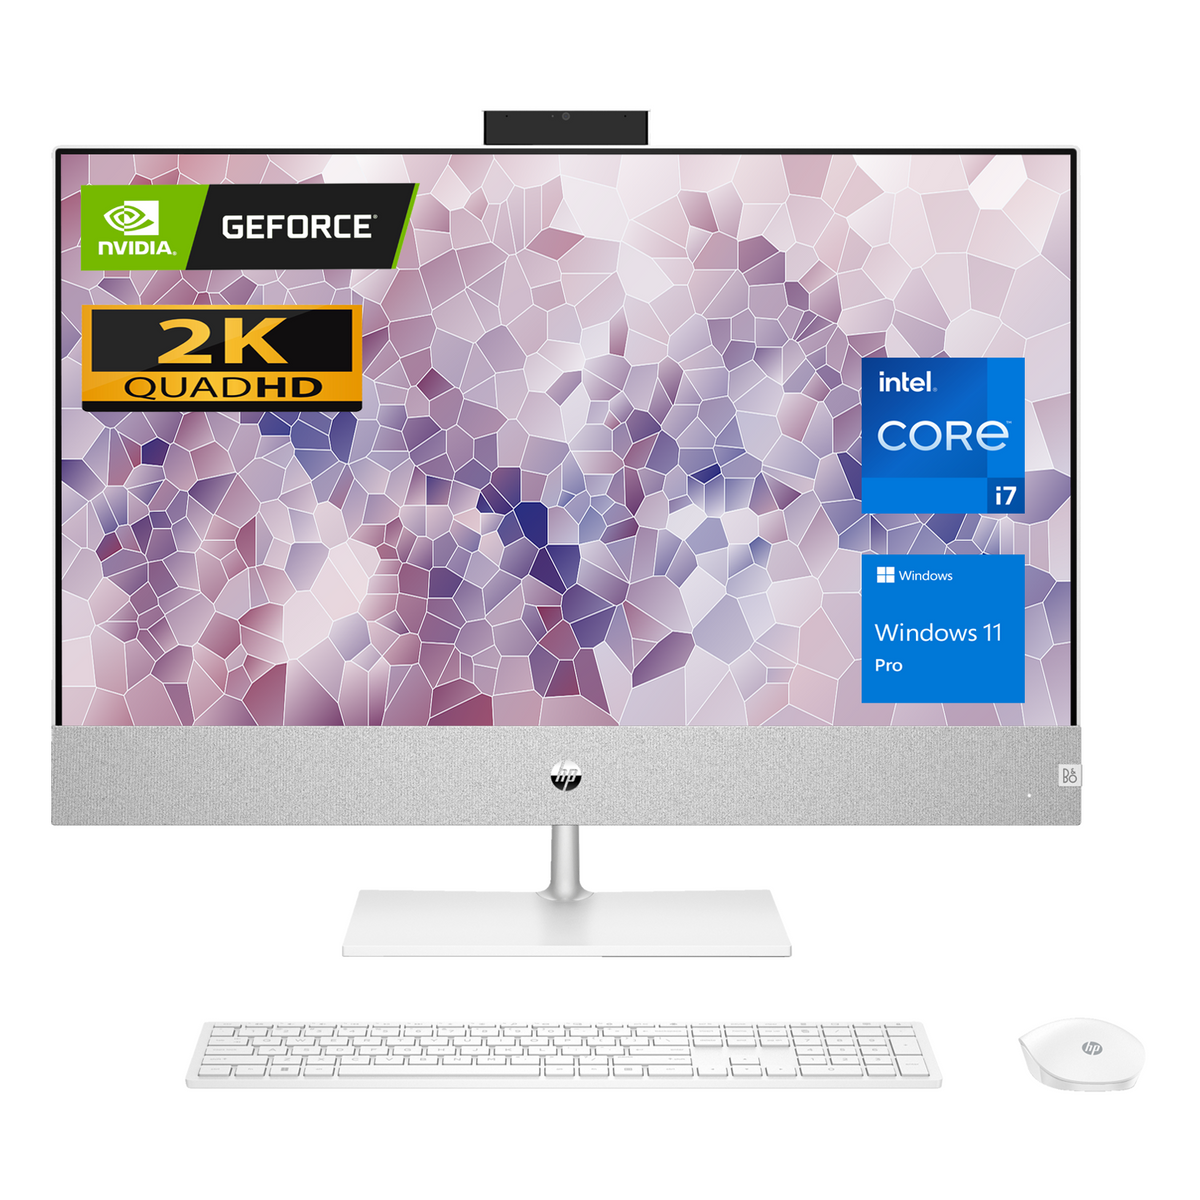 HP Pavilion 27-ca2000 All-in-One, 27" QHD 2560 * 1440 Non-touch 60Hz, Intel Core i7-13700T, NVIDIA GeForce RTX 3050, 8GB DDR4 SODIMM RAM, 512GB PCIe M.2 SSD, Wi-Fi 6, Windows 11 Home, White